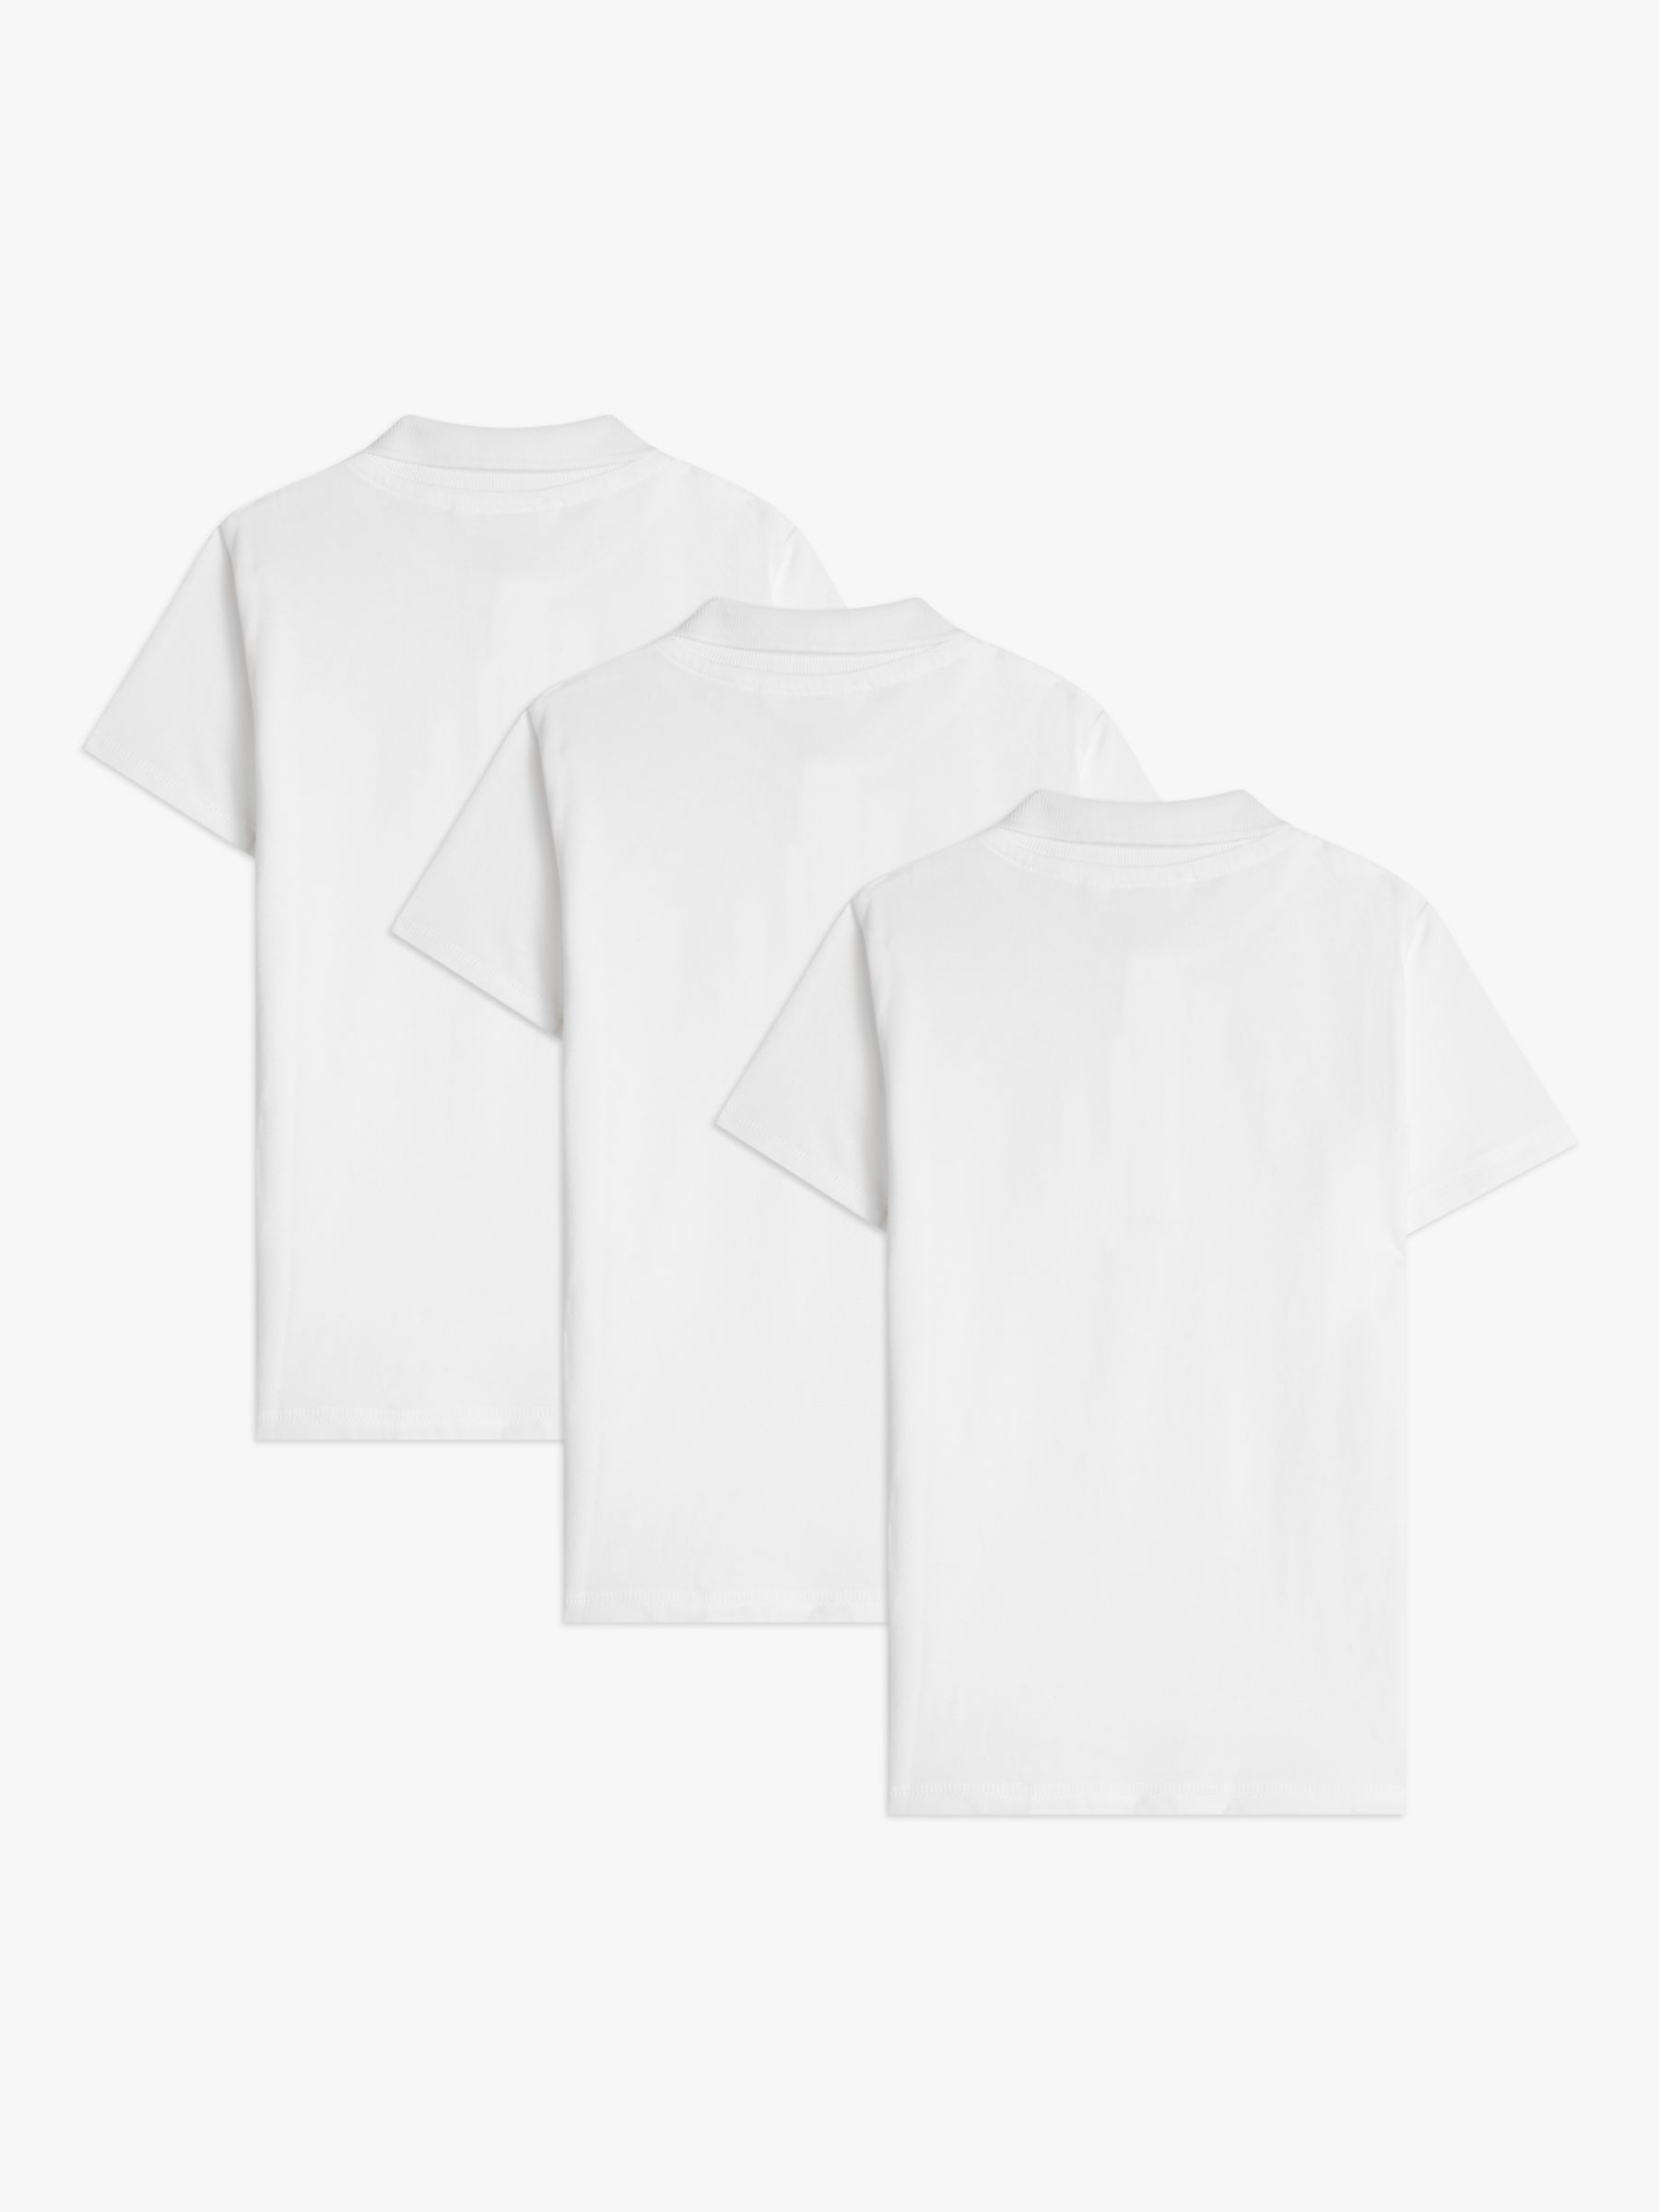 ANYDAY John Lewis & Partners The Basics Pure Cotton Polo Shirt, Pack of 3, White